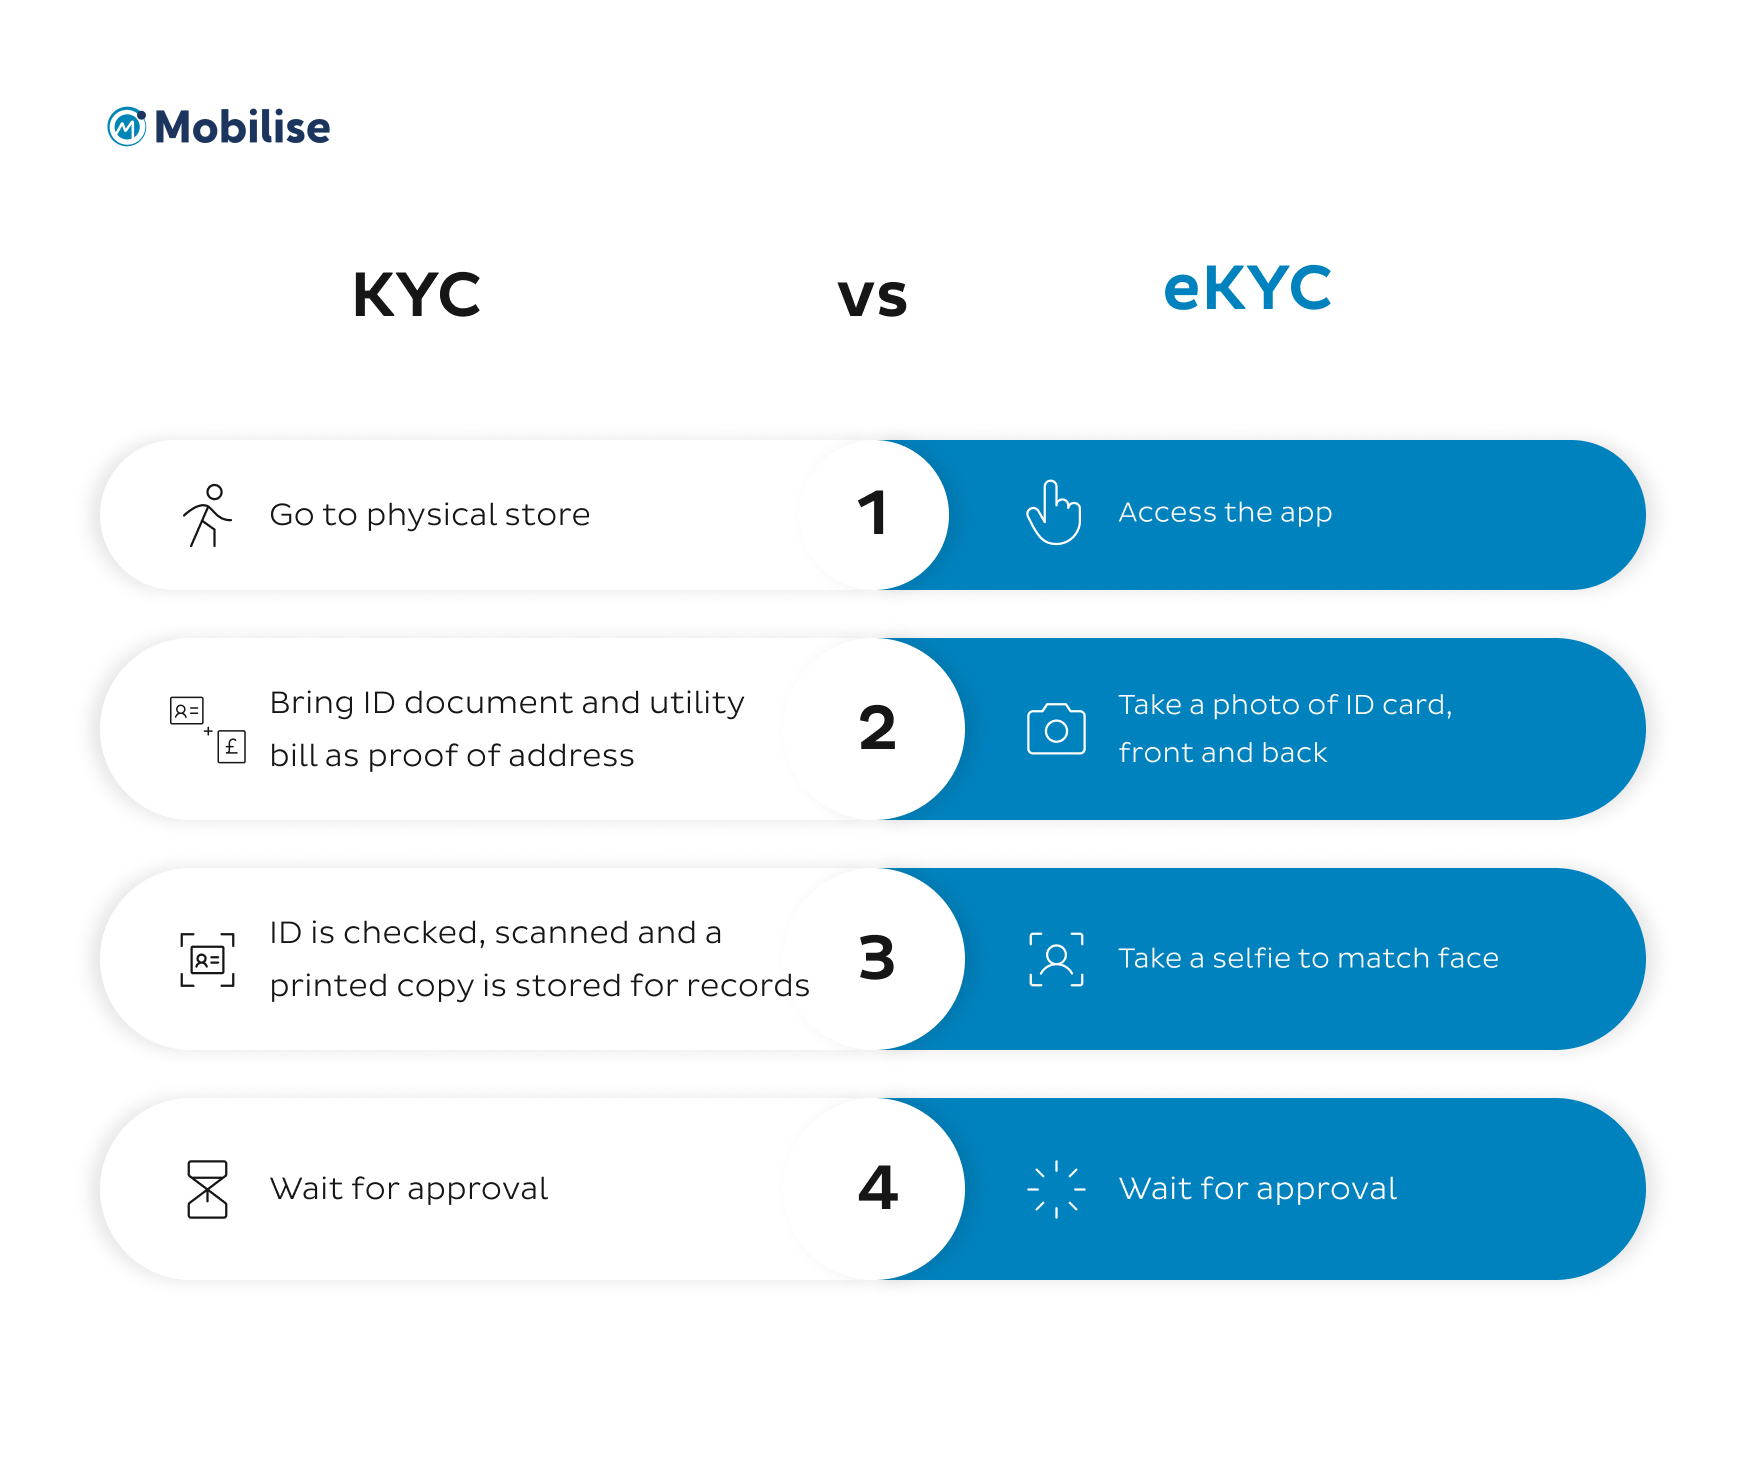 Image showing difference between eKYC and KYC journey